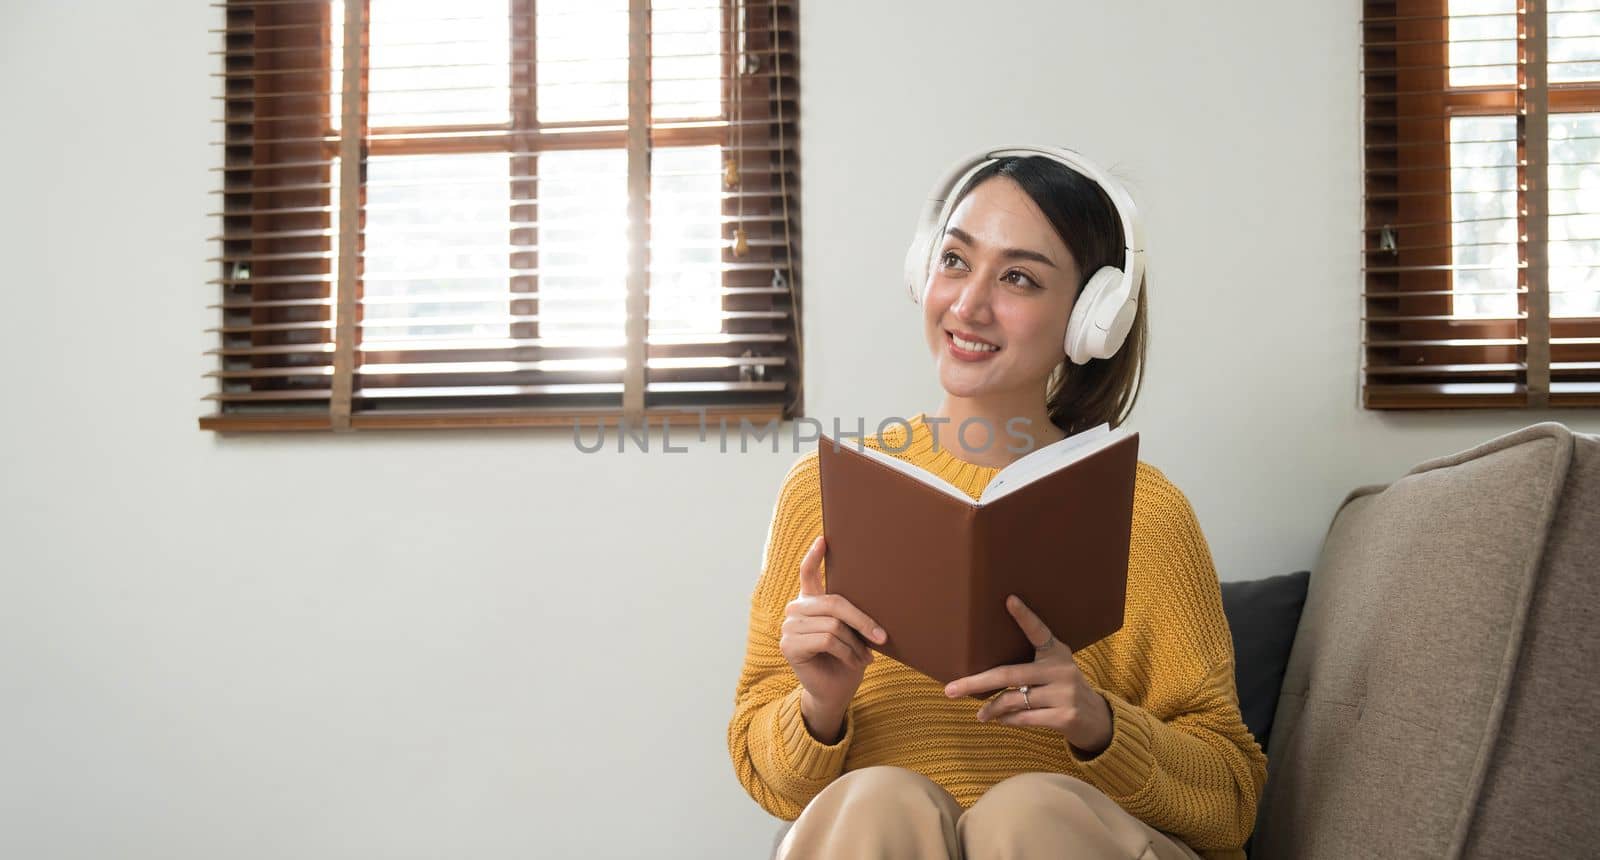 Smiling girl relaxing at home, she is playing music using a smartphone and wearing white headphones..